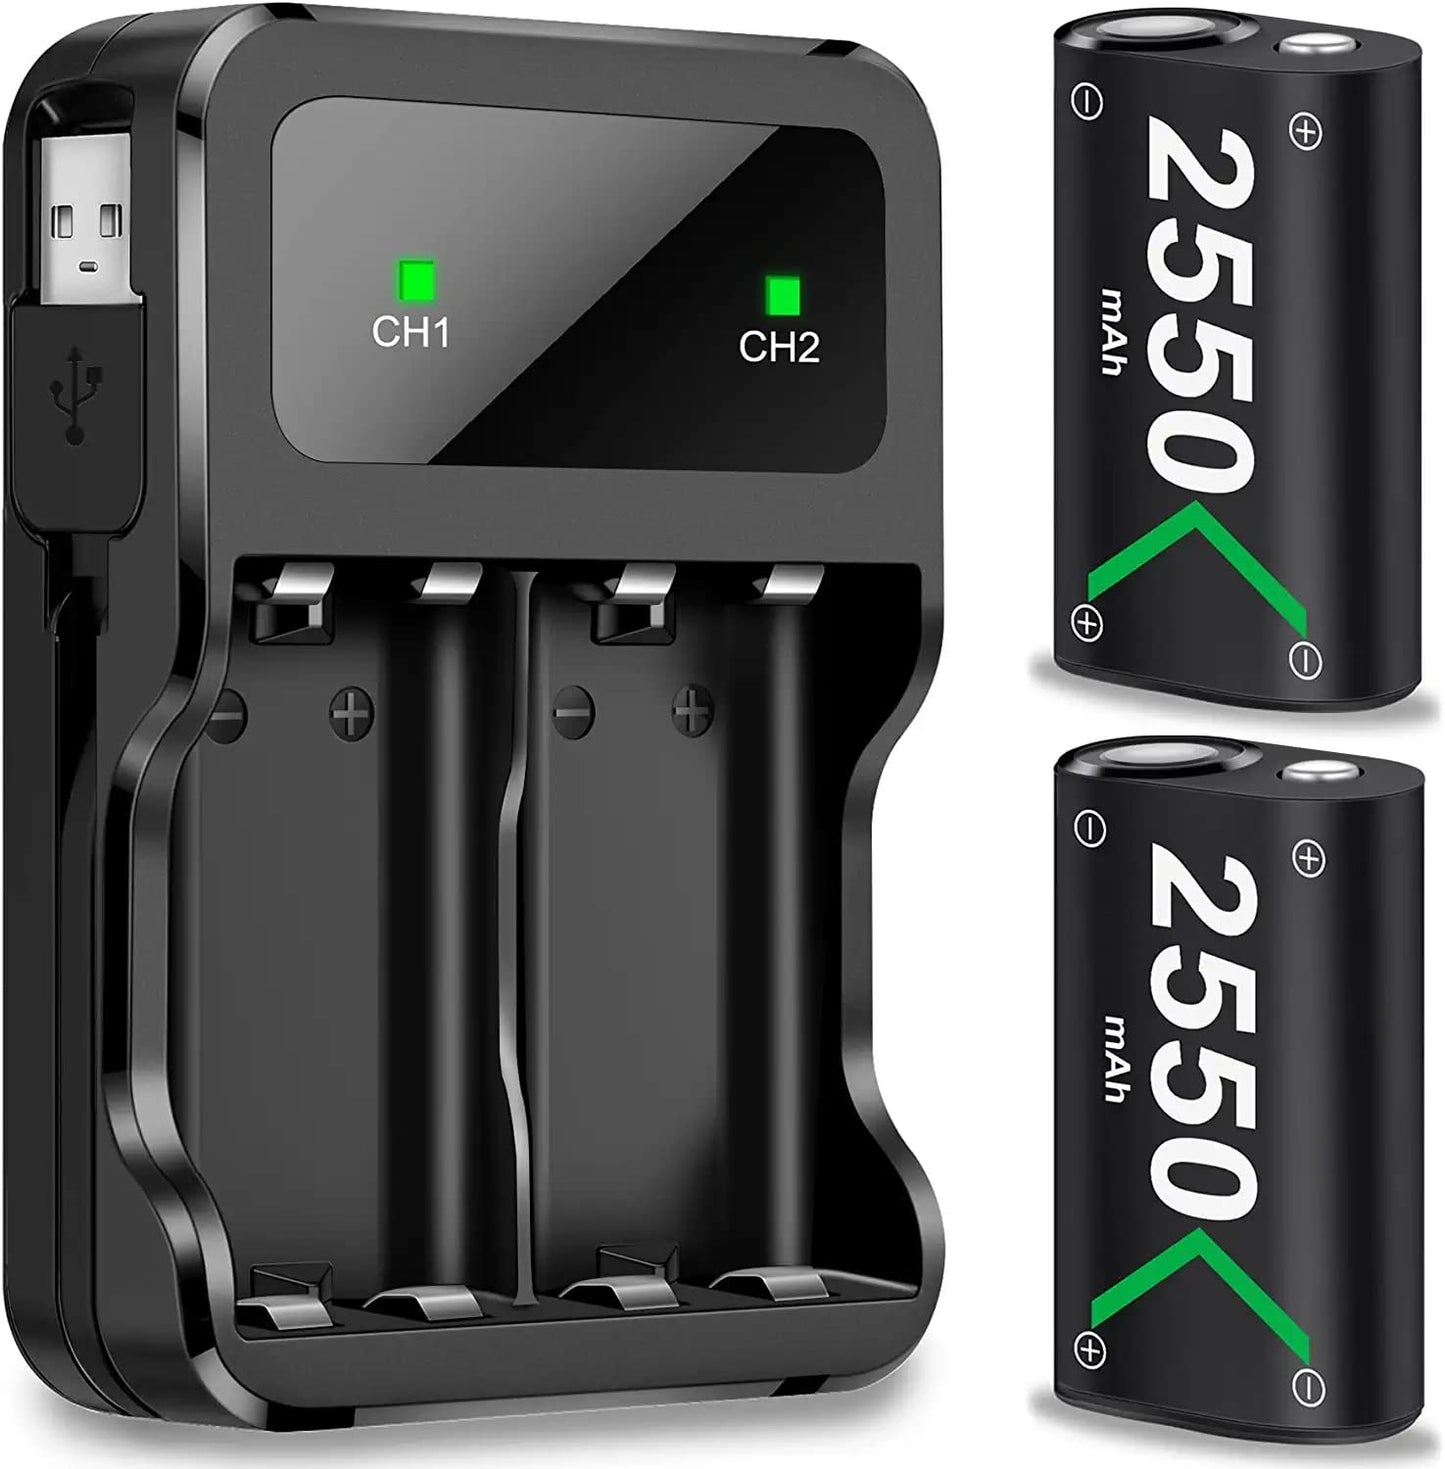 Professional Grade Rechargeable Battery Pack for Xbox One/Xbox Series X|S Controllers - Includes 2X2550mAh Xbox Controller Battery Pack in Green